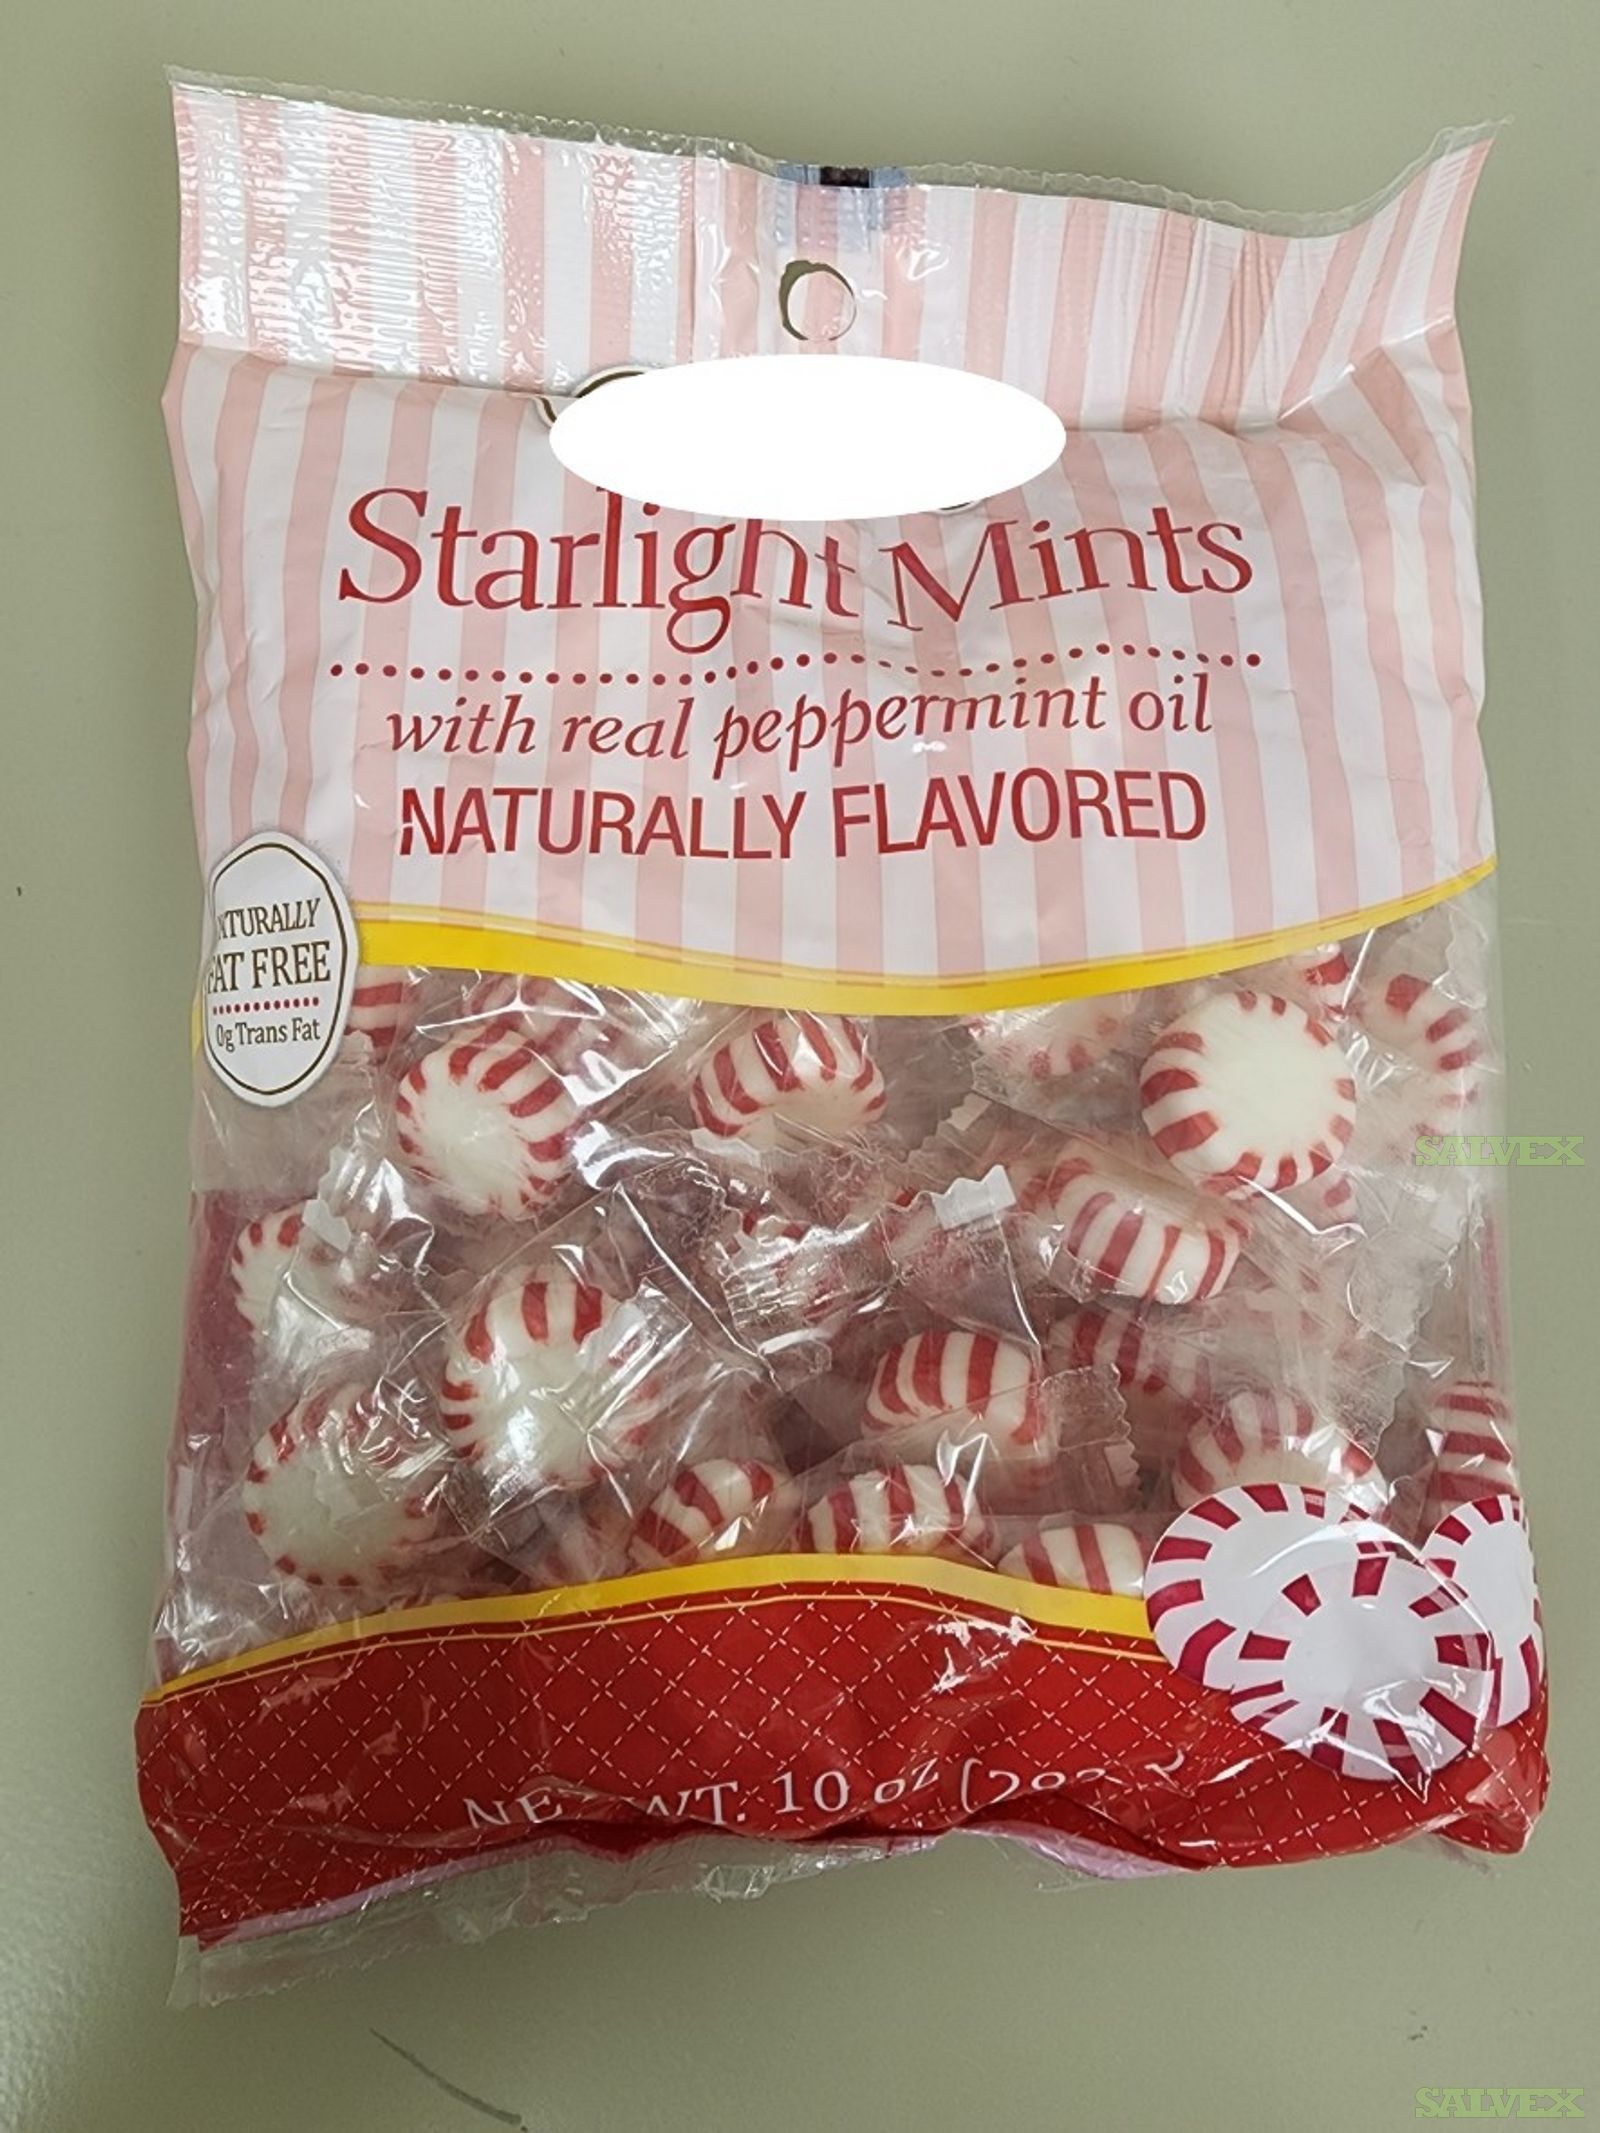 Hard Candy (Party Mix, Starlight Mints and Cinnamon Discs) 3,170 Cases